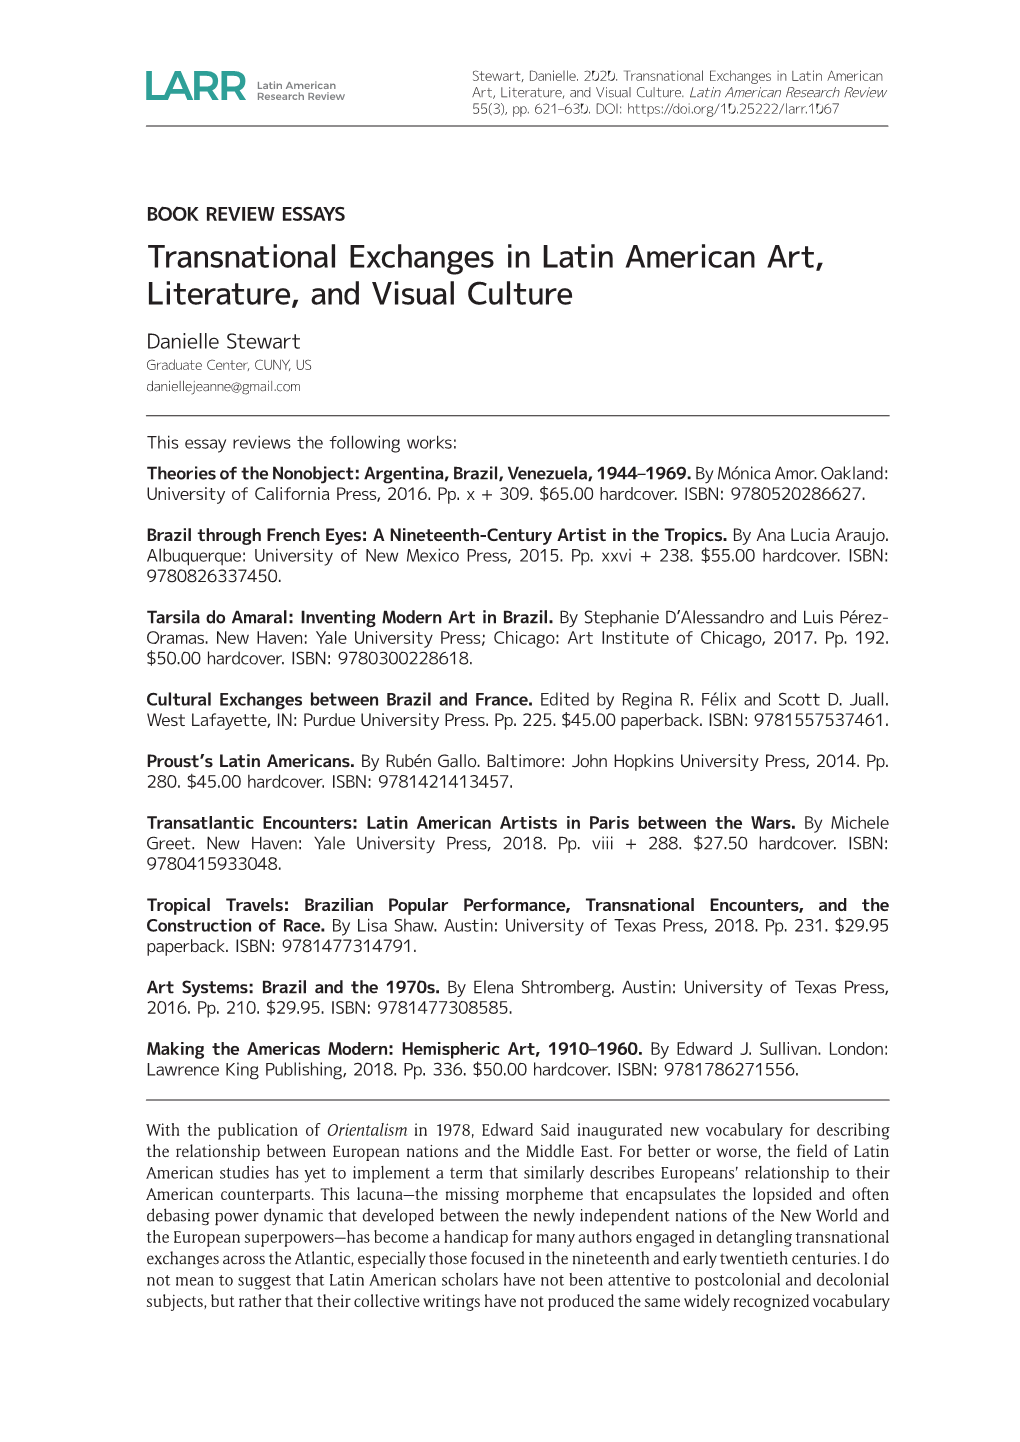 Transnational Exchanges in Latin American Art, Literature, and Visual Culture